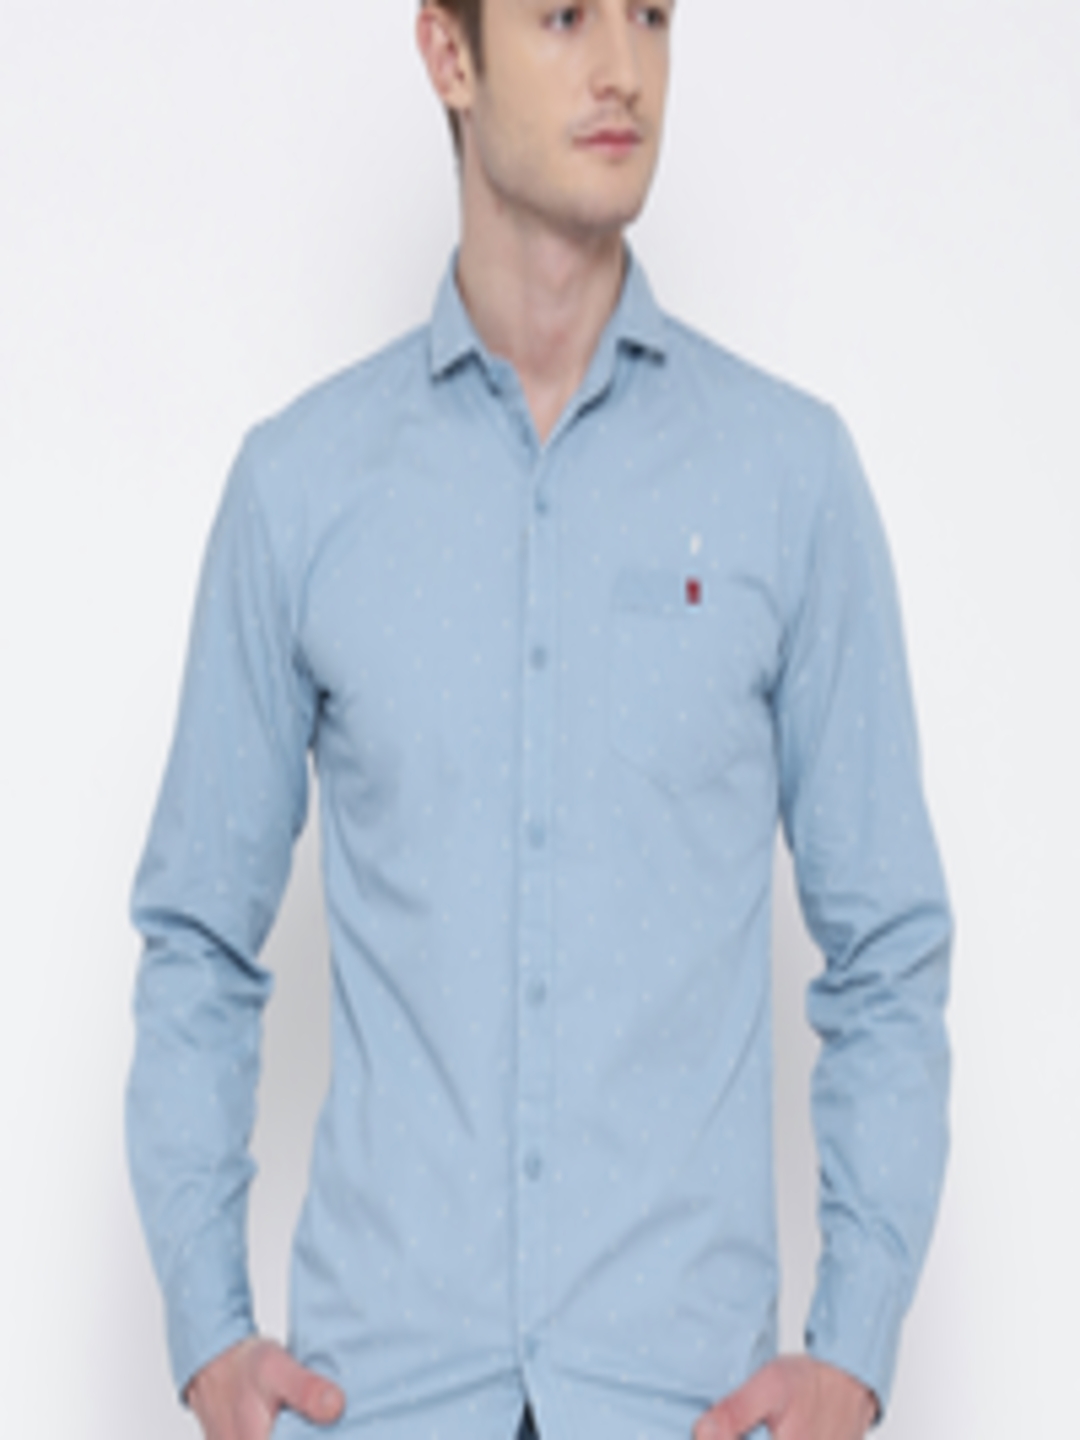 Buy FIFTY TWO Powder Blue Printed Casual Shirt - Shirts for Men 1213832 ...